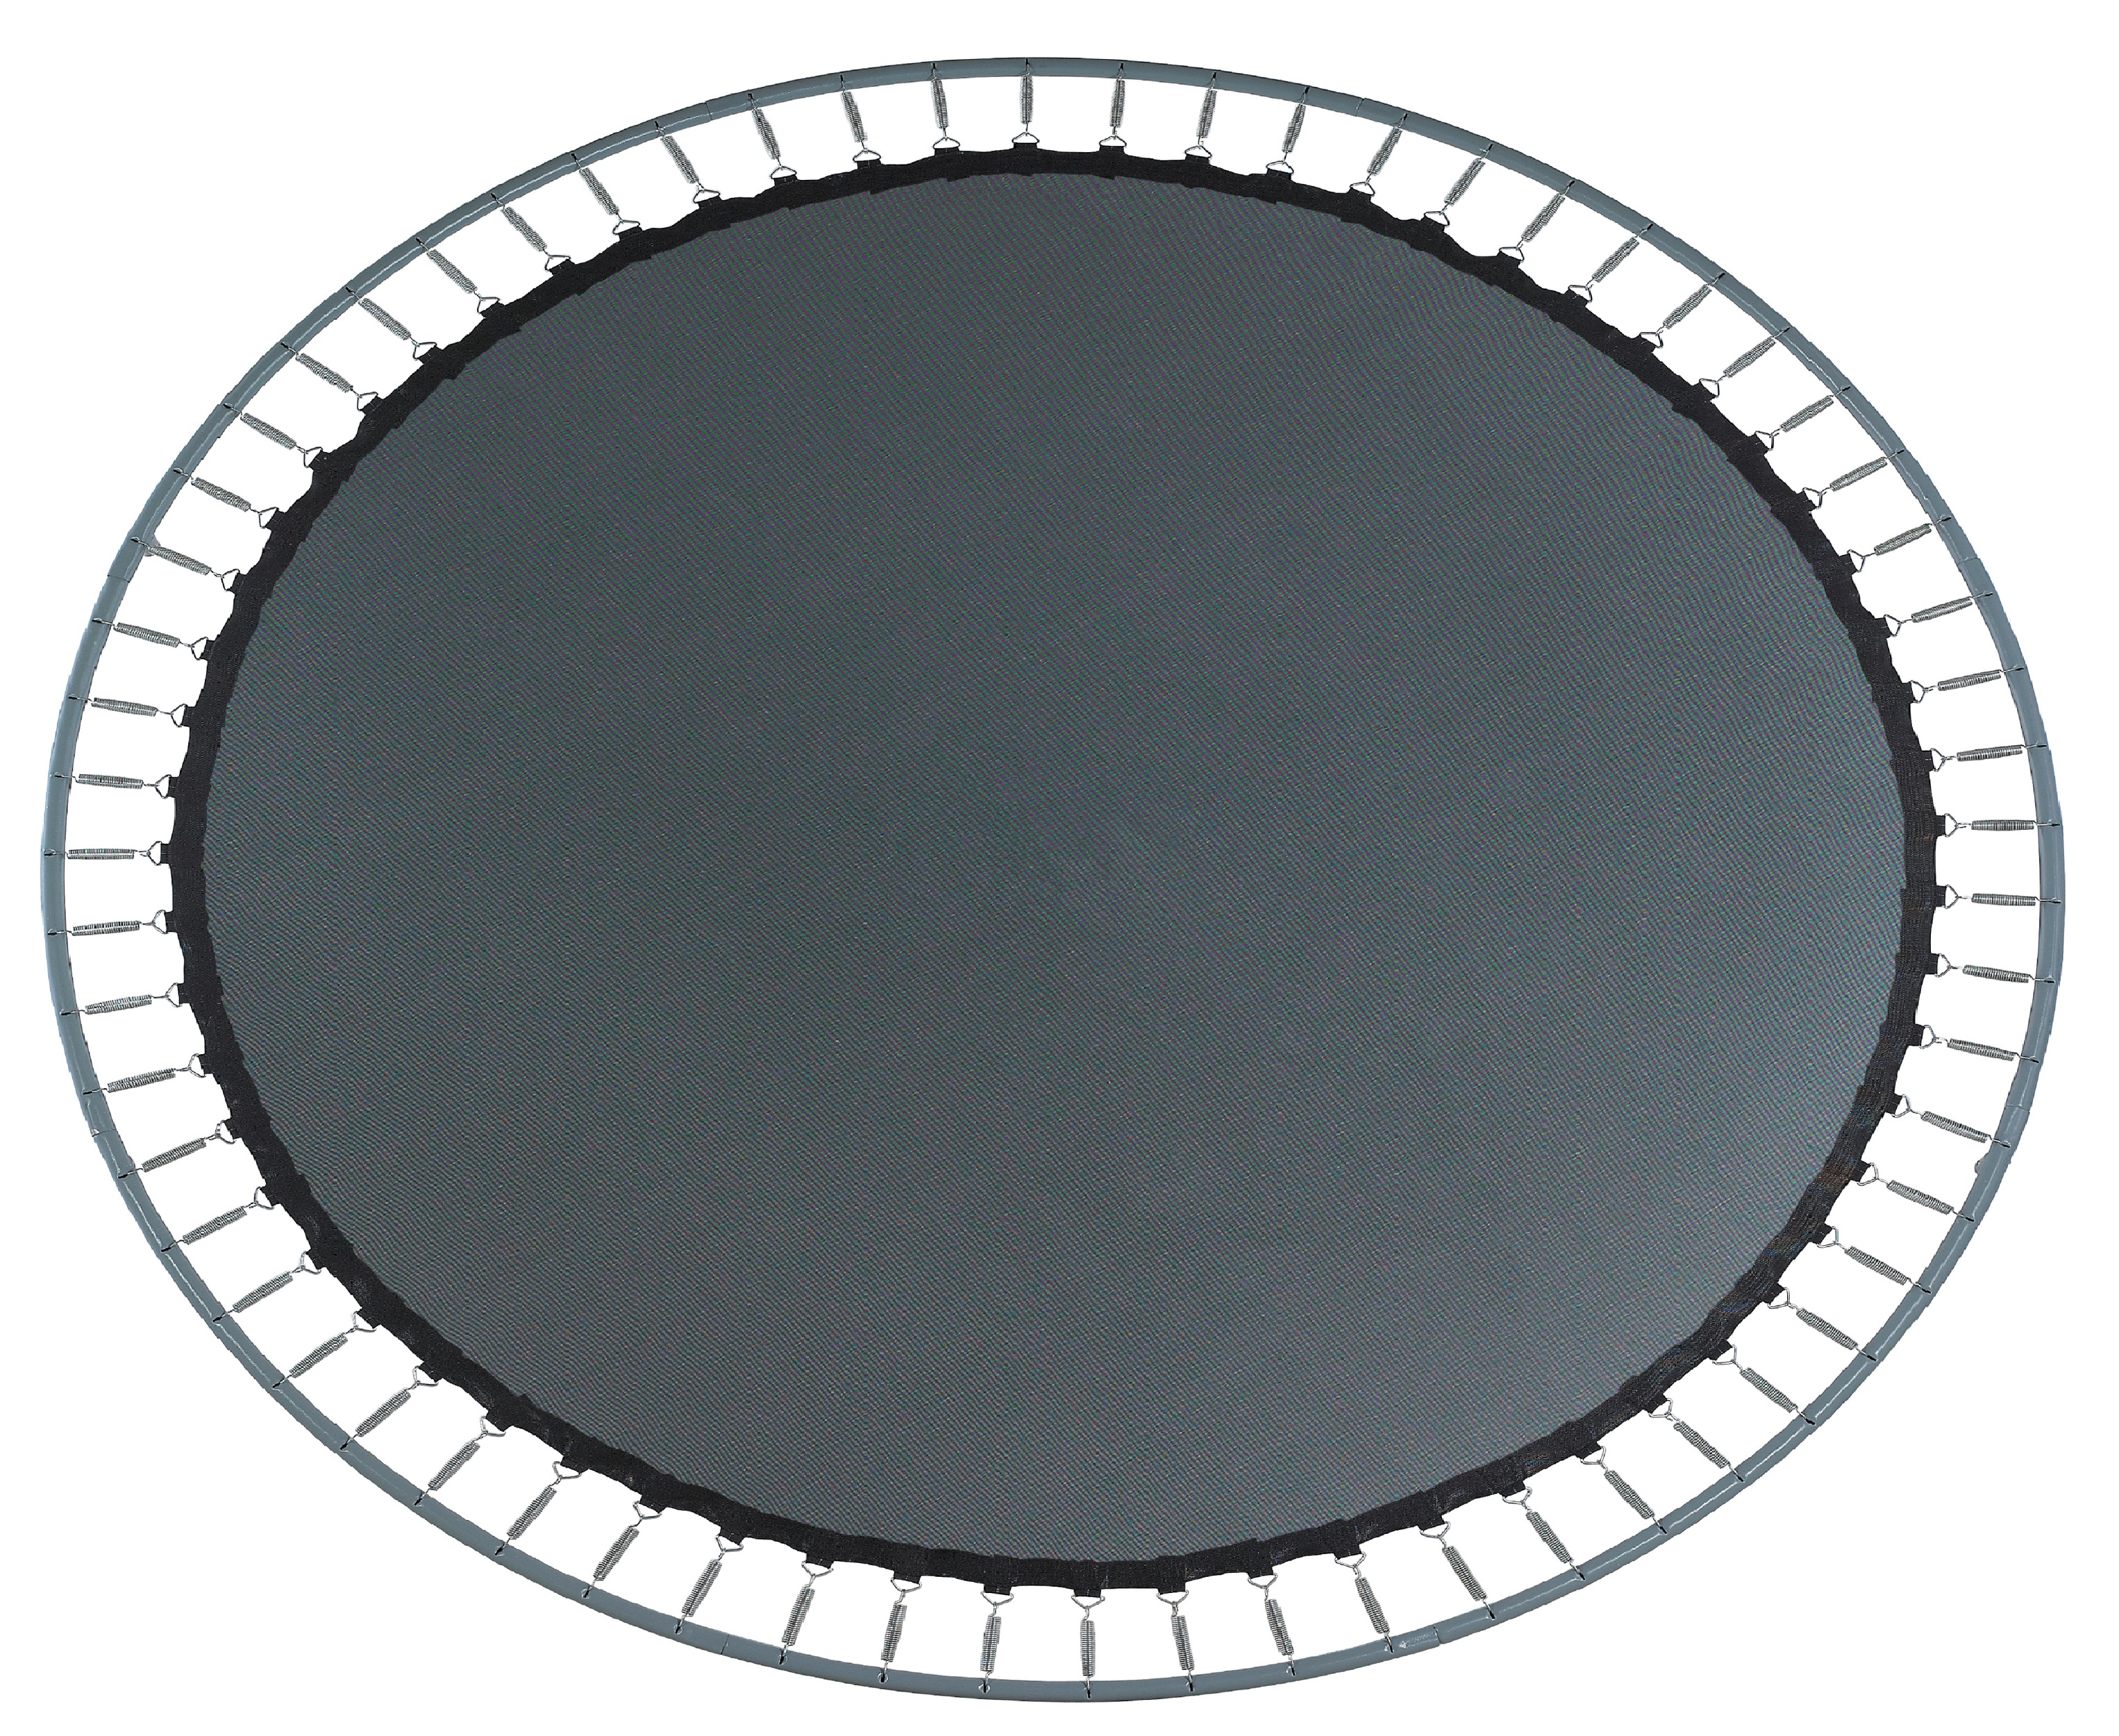 Upper Bounce Jumping Surface for 17' Trampoline with 96 V-Rings for 7'' Springs - image 3 of 4